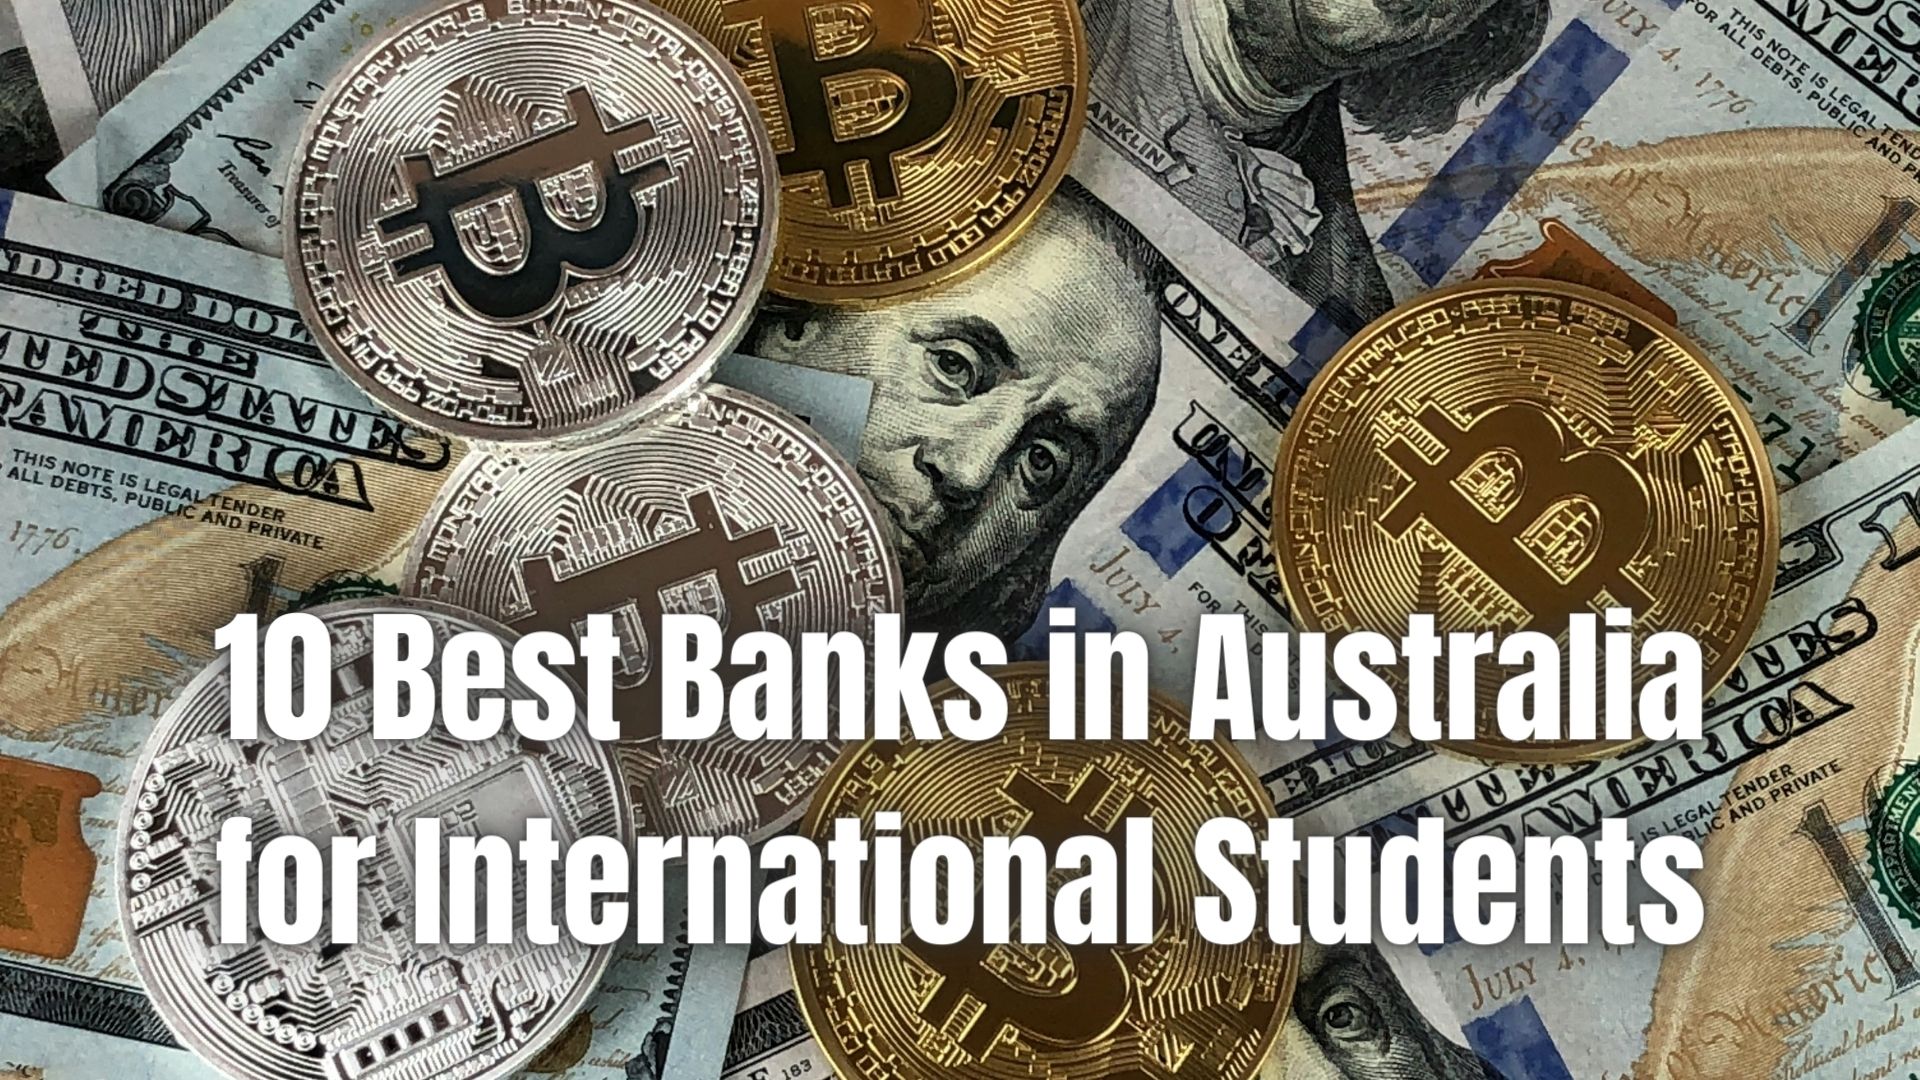 Comprehensive guide to choosing the best bank in Australia. Discover the top 10 banks and find the perfect fit for your financial needs.